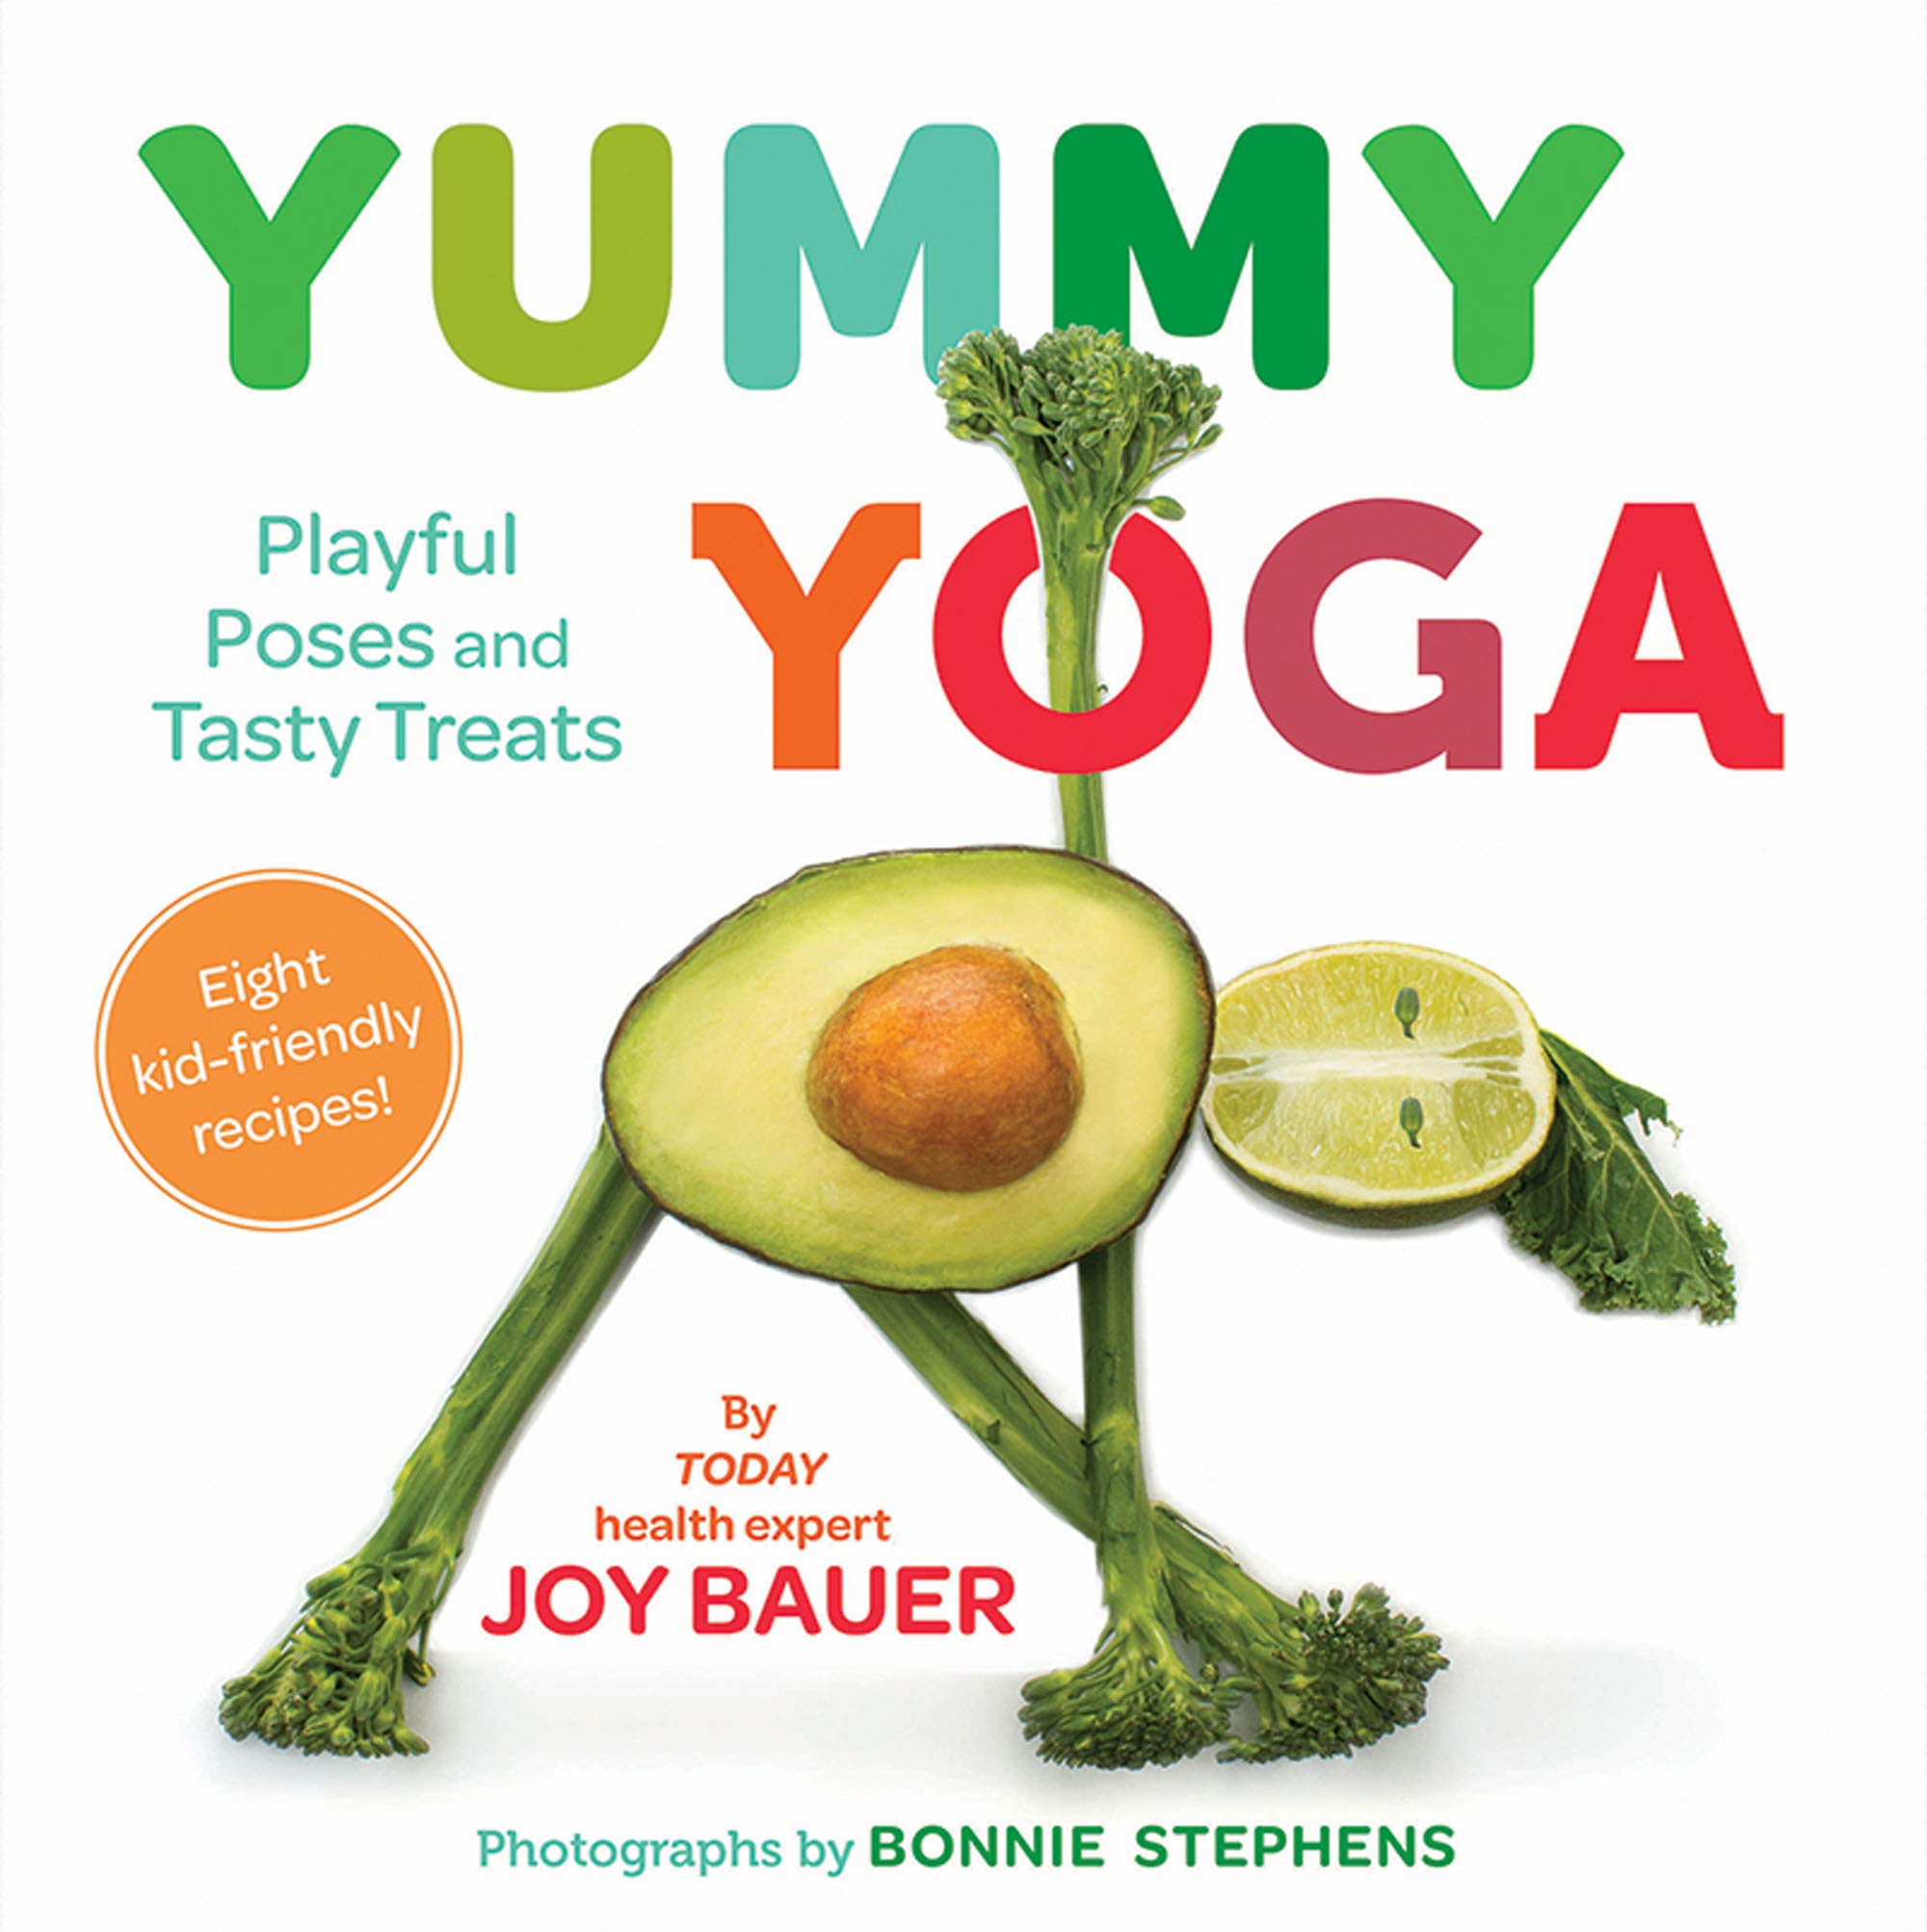 "Yummy Yoga: Playful Poses and Tasty Treats" Book Cover